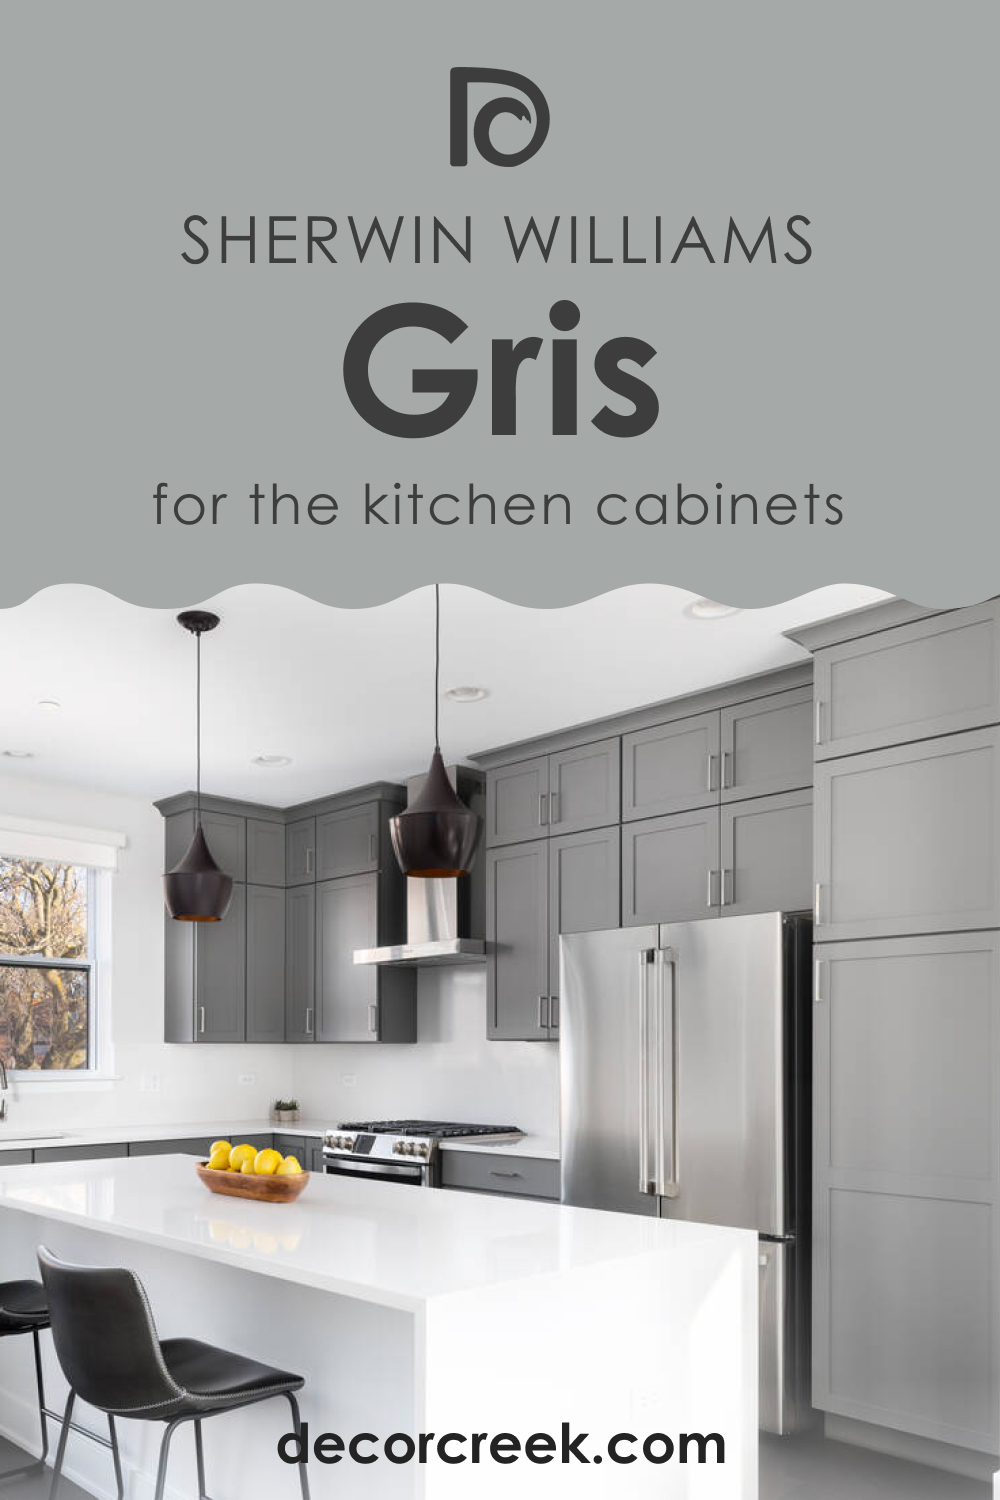 How to Use SW 7659 Gris for the Kitchen Cabinets?